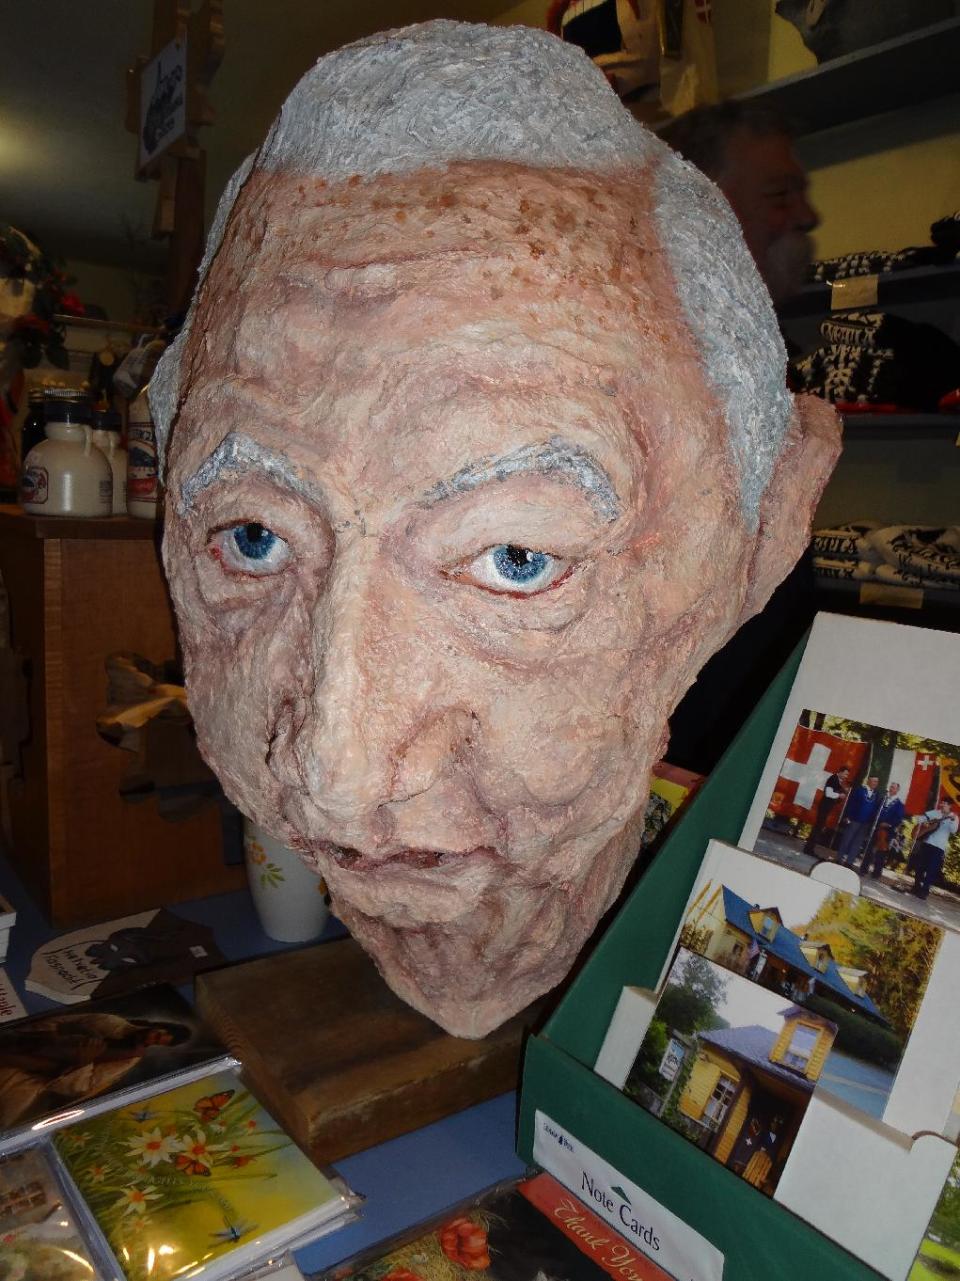 A homemade mask of West Virginia's late U.S. senator, Robert C. Byrd, sits in the store and mask museum in Helvetia, W.Va., on Saturday, Feb. 9, 2013, where revelers were celebrating the annual Fasnacht festival. (AP Photo/Vicki Smith)